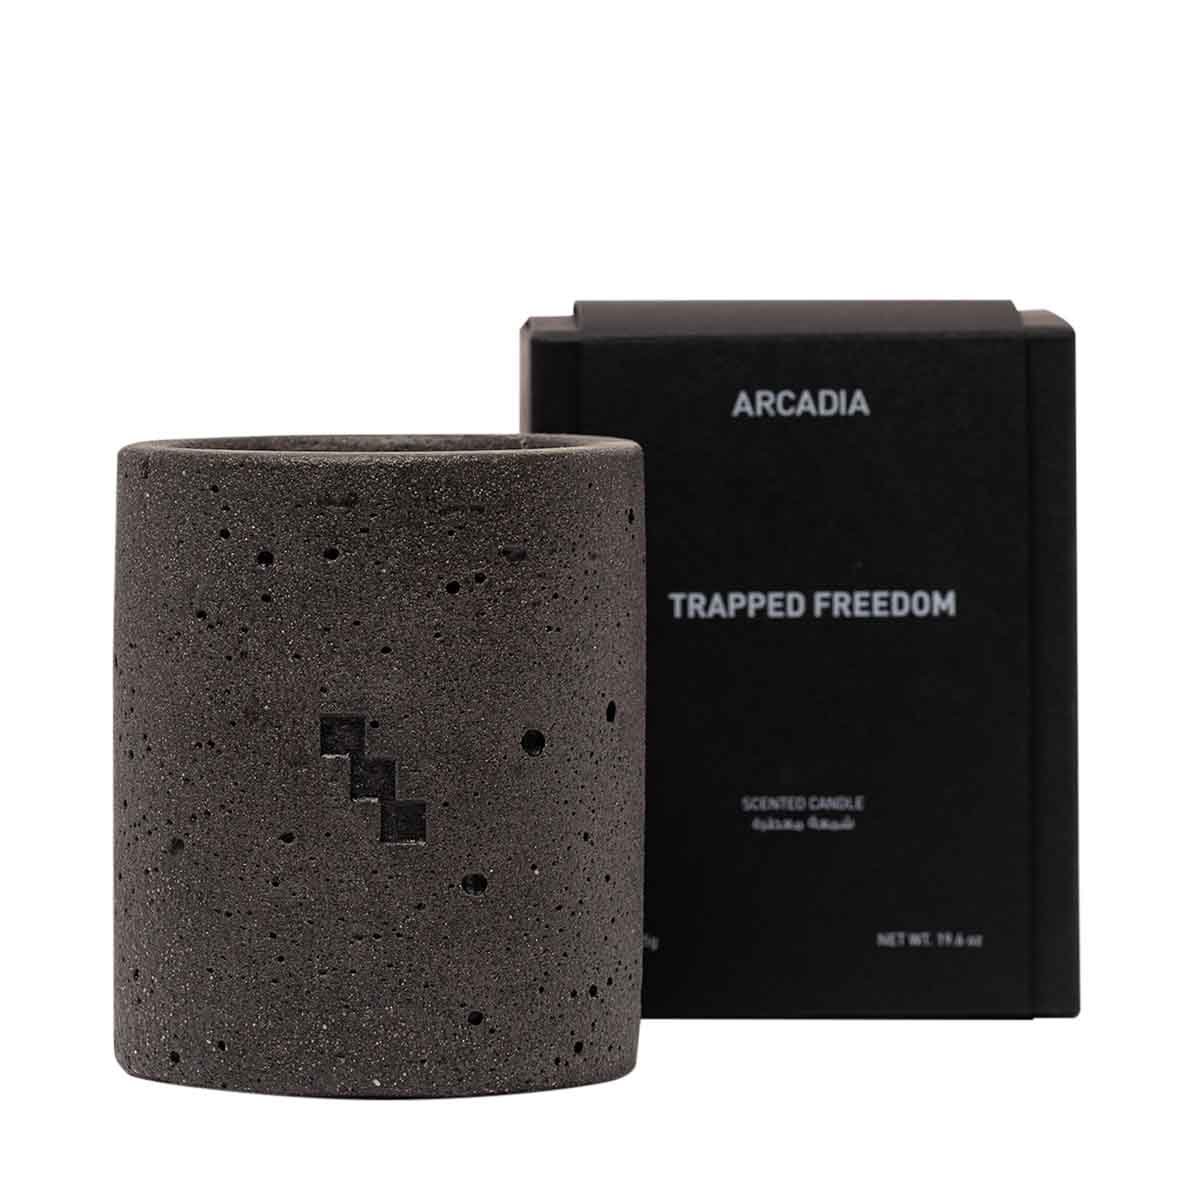 Trapped Freedom candle